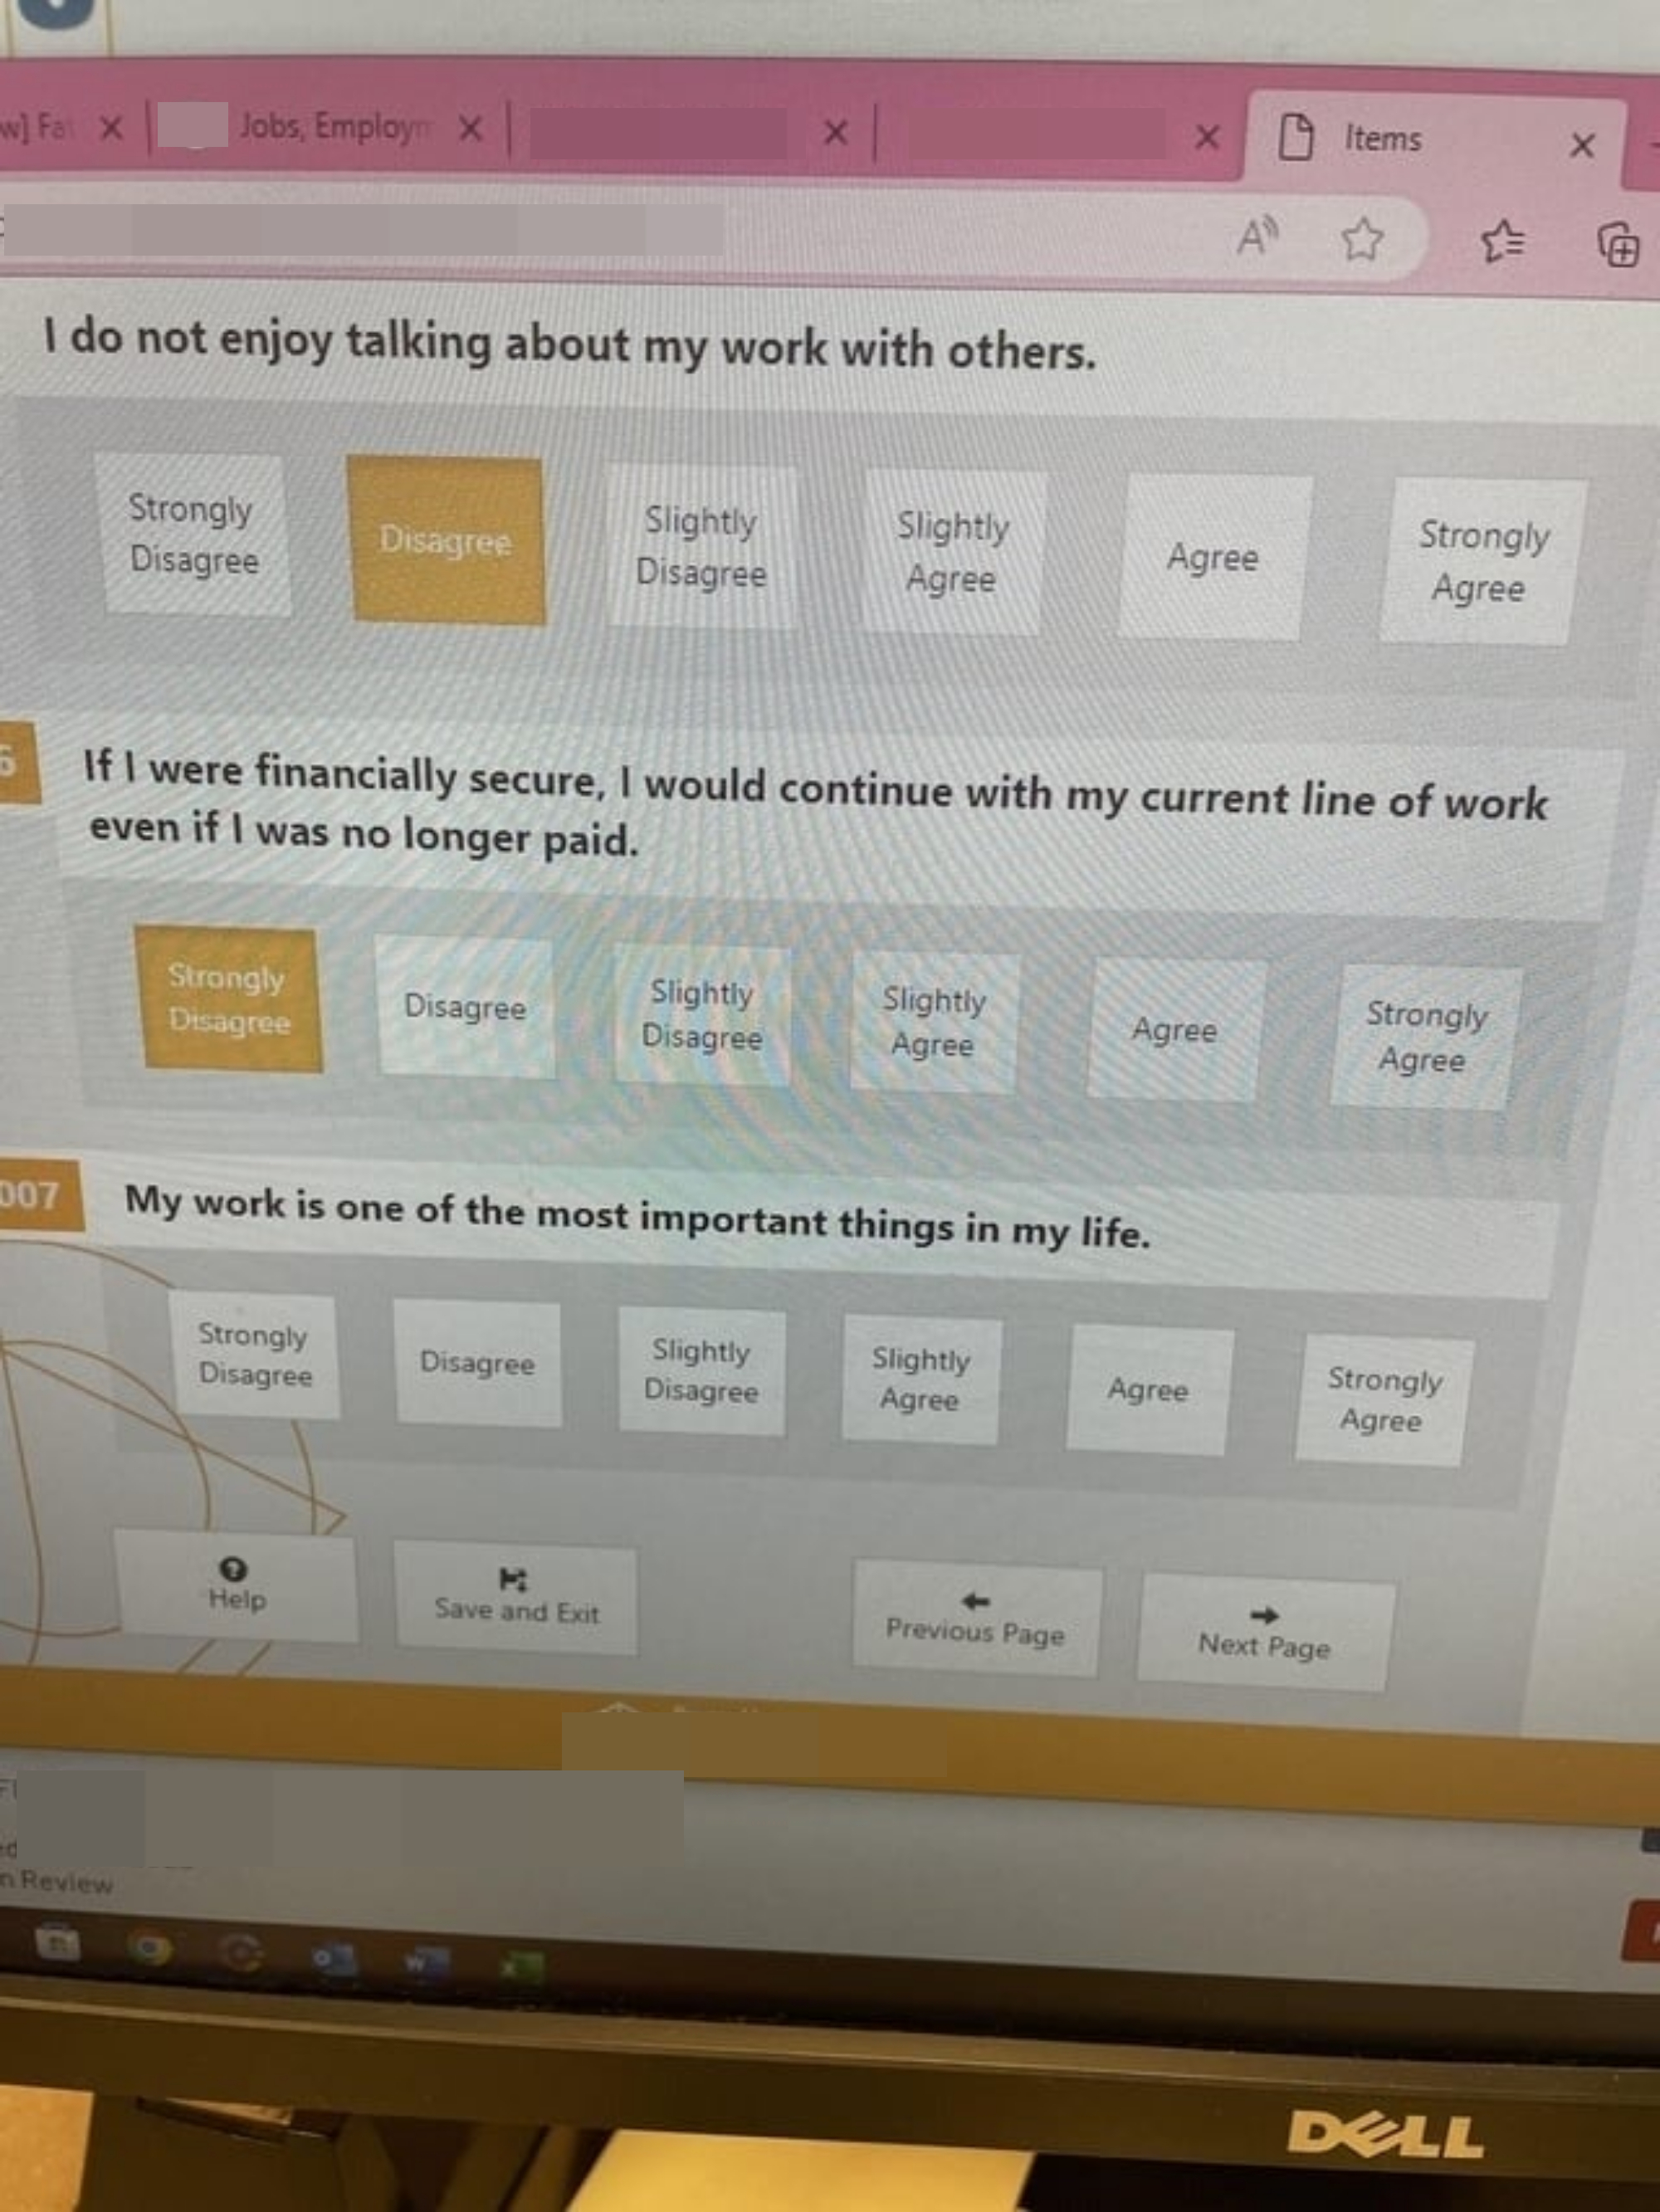 Questions on survey: &quot;I do not enjoy talking about my work with others,&quot; &quot;If I were financially secure, I would continue with my current line of work even if I was no longer paid,&quot; and &quot;My work is one of the most important things in my life&quot;